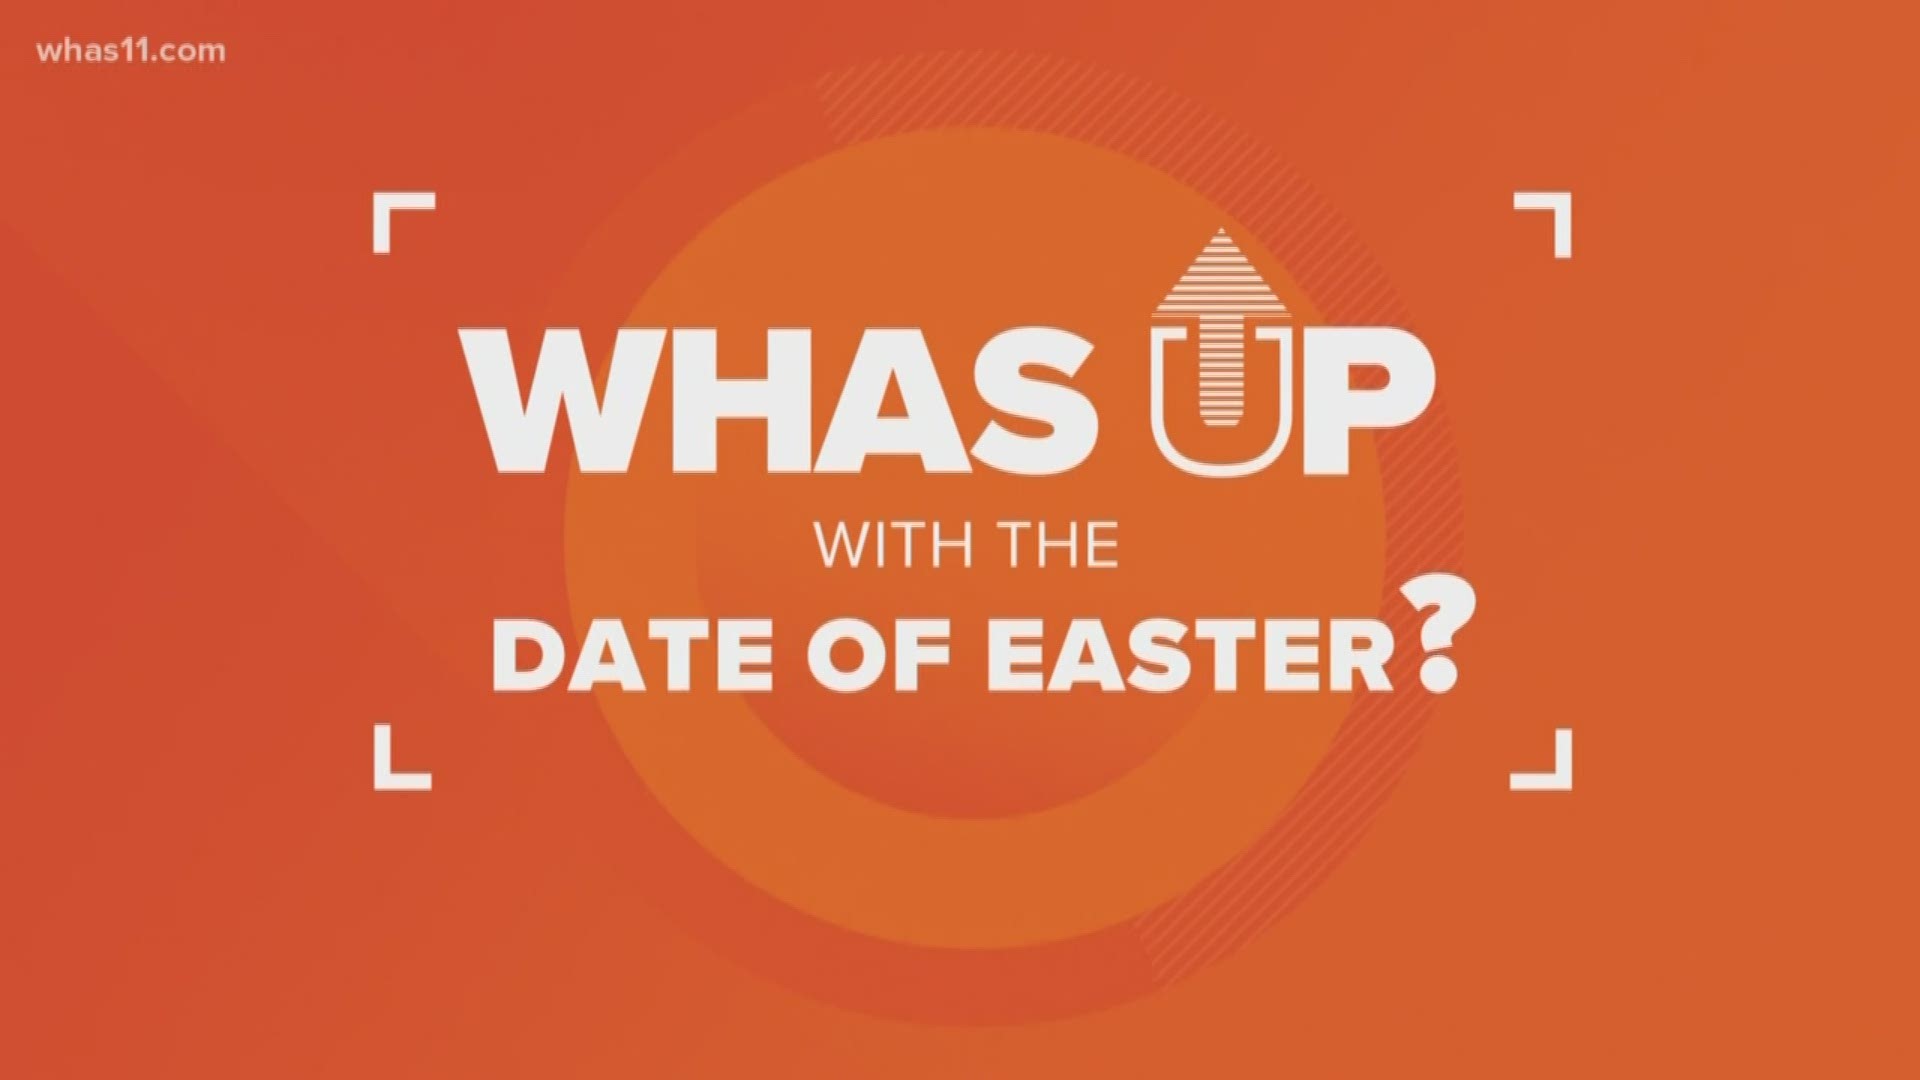 Rob Harris gives us a closer look into how the date of Easter is decided